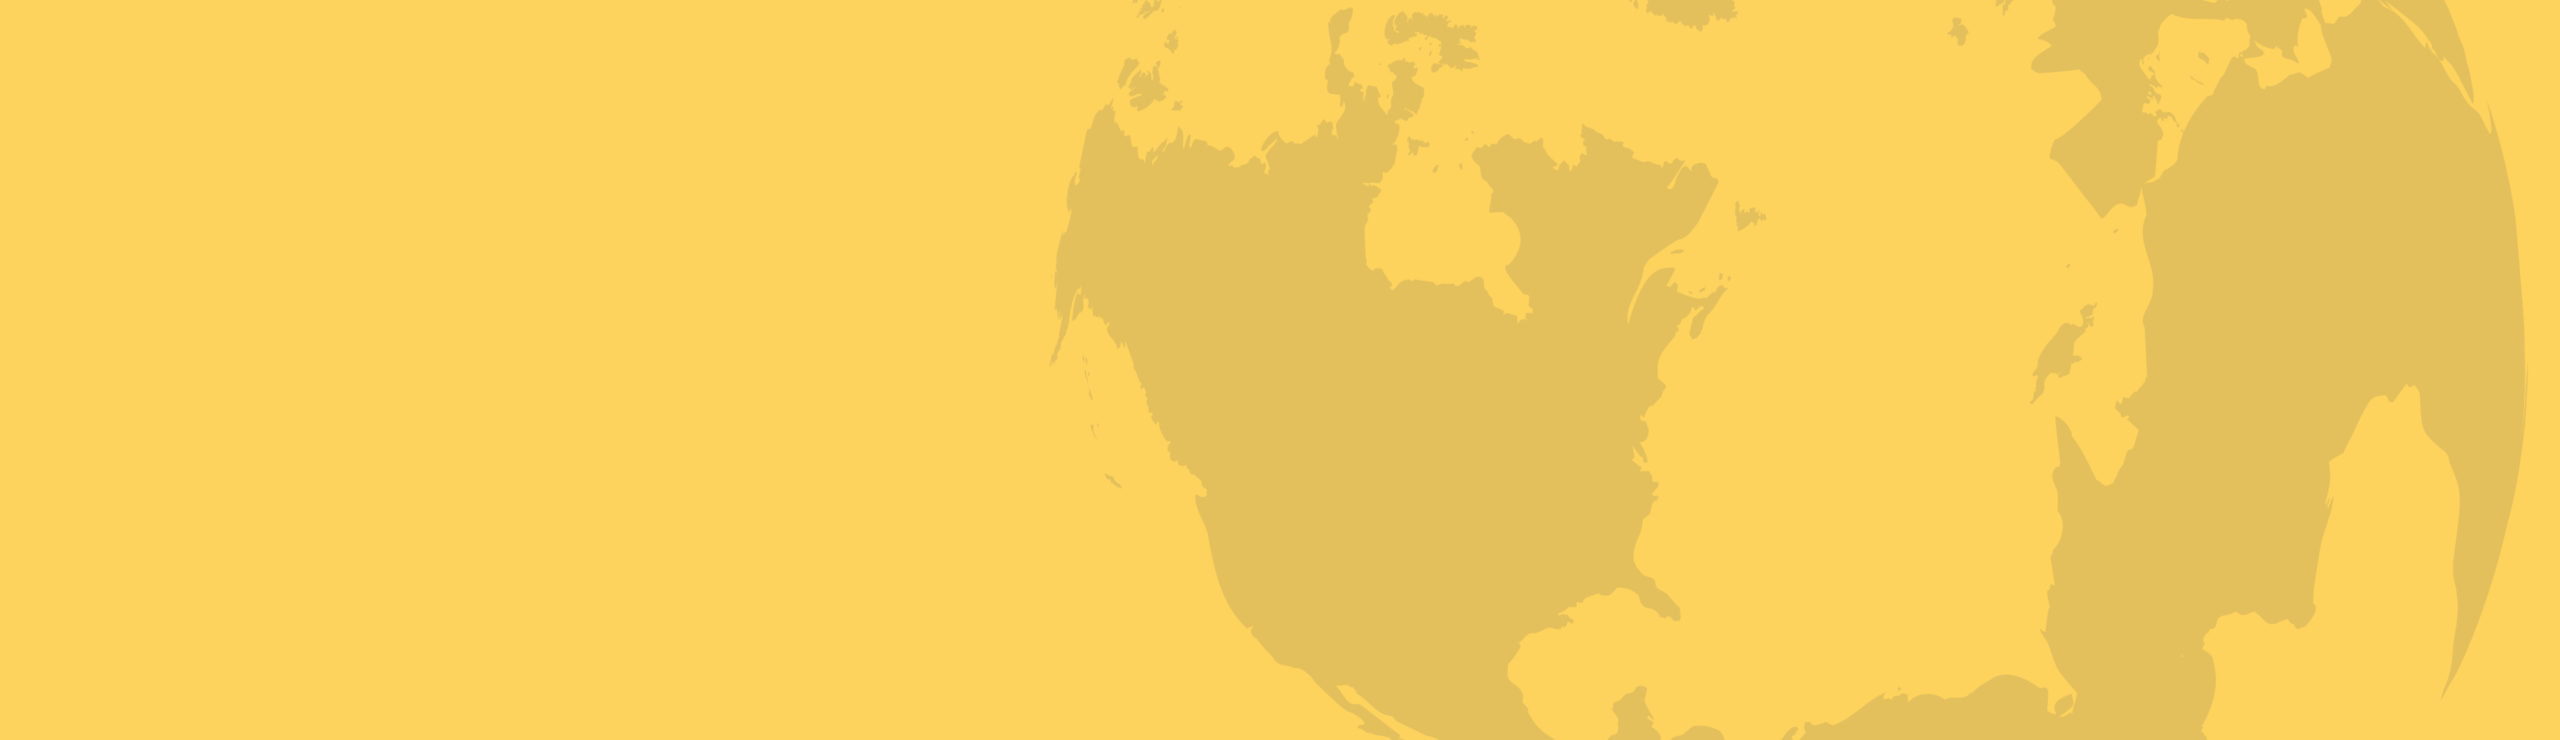 Minimalistic golden-yellow world map on a plain background, representing Delta Scientific's global reach in high-security solutions and services.